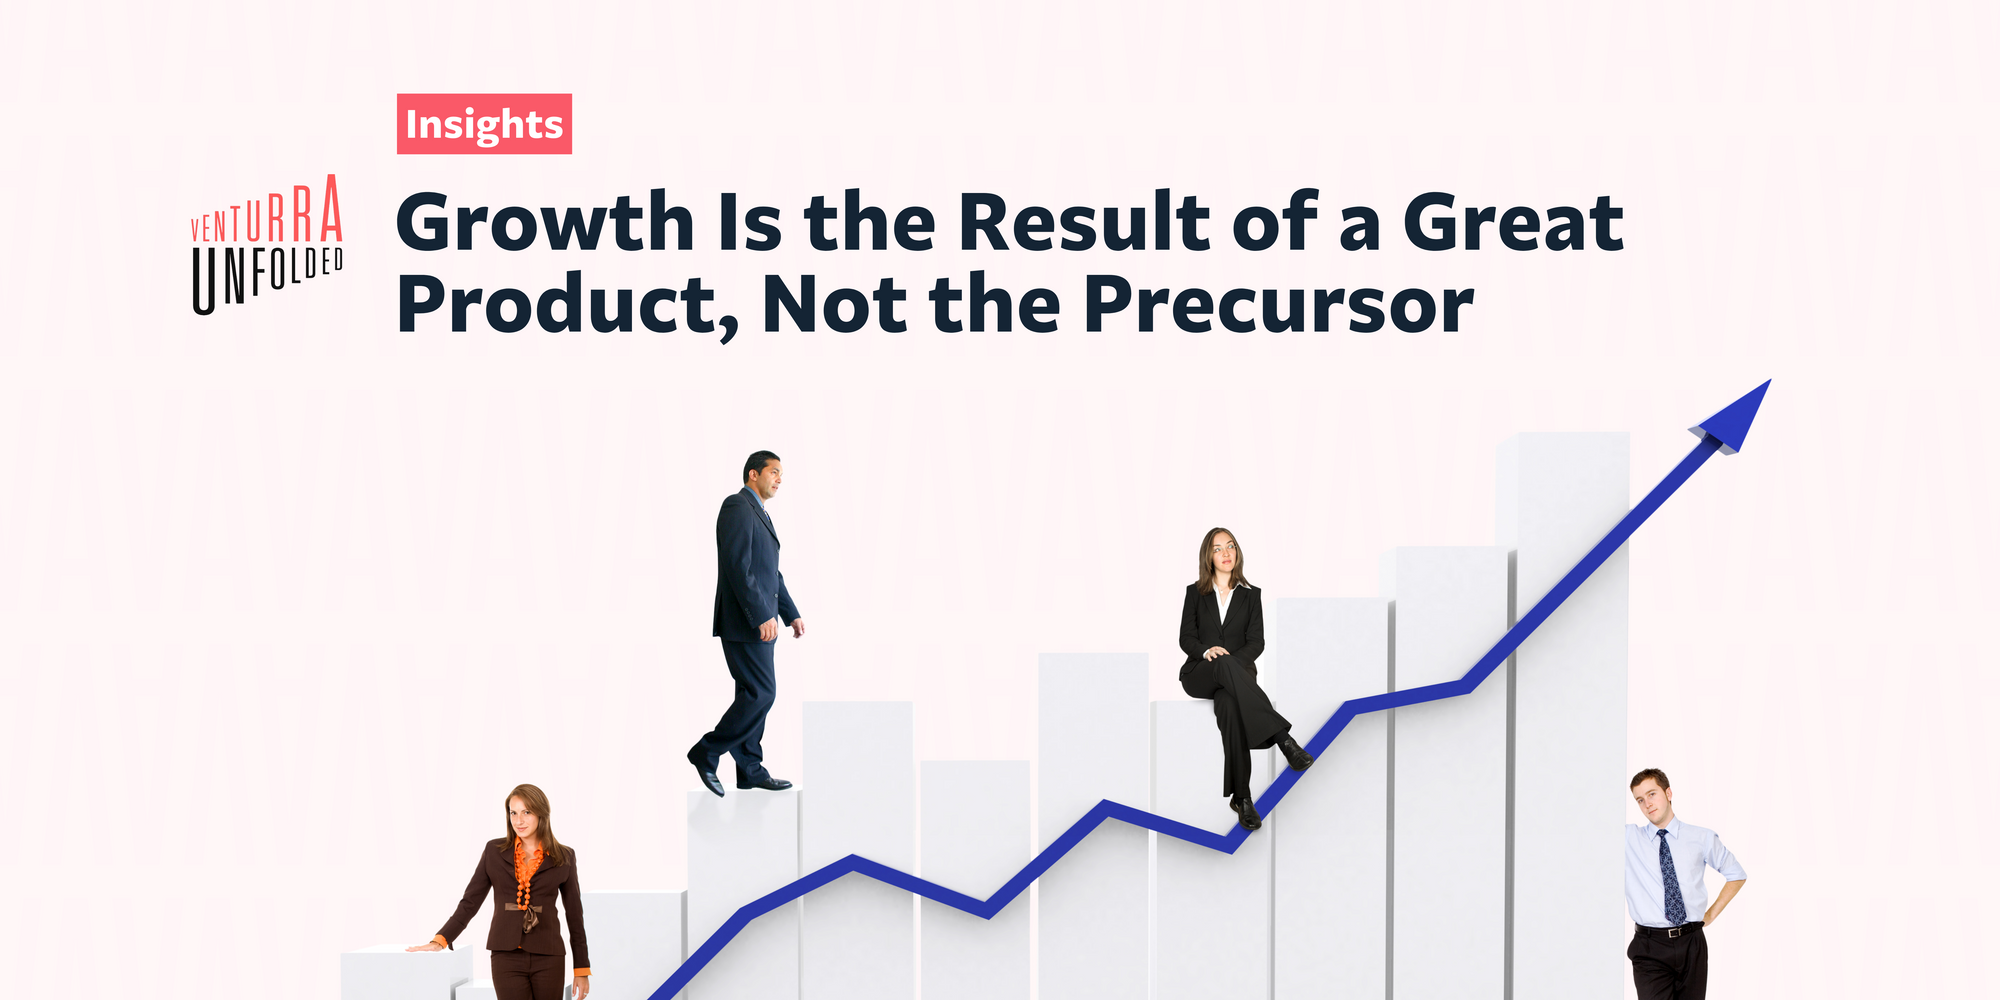 Growth Is the Result of a Great Product, Not the Precursor